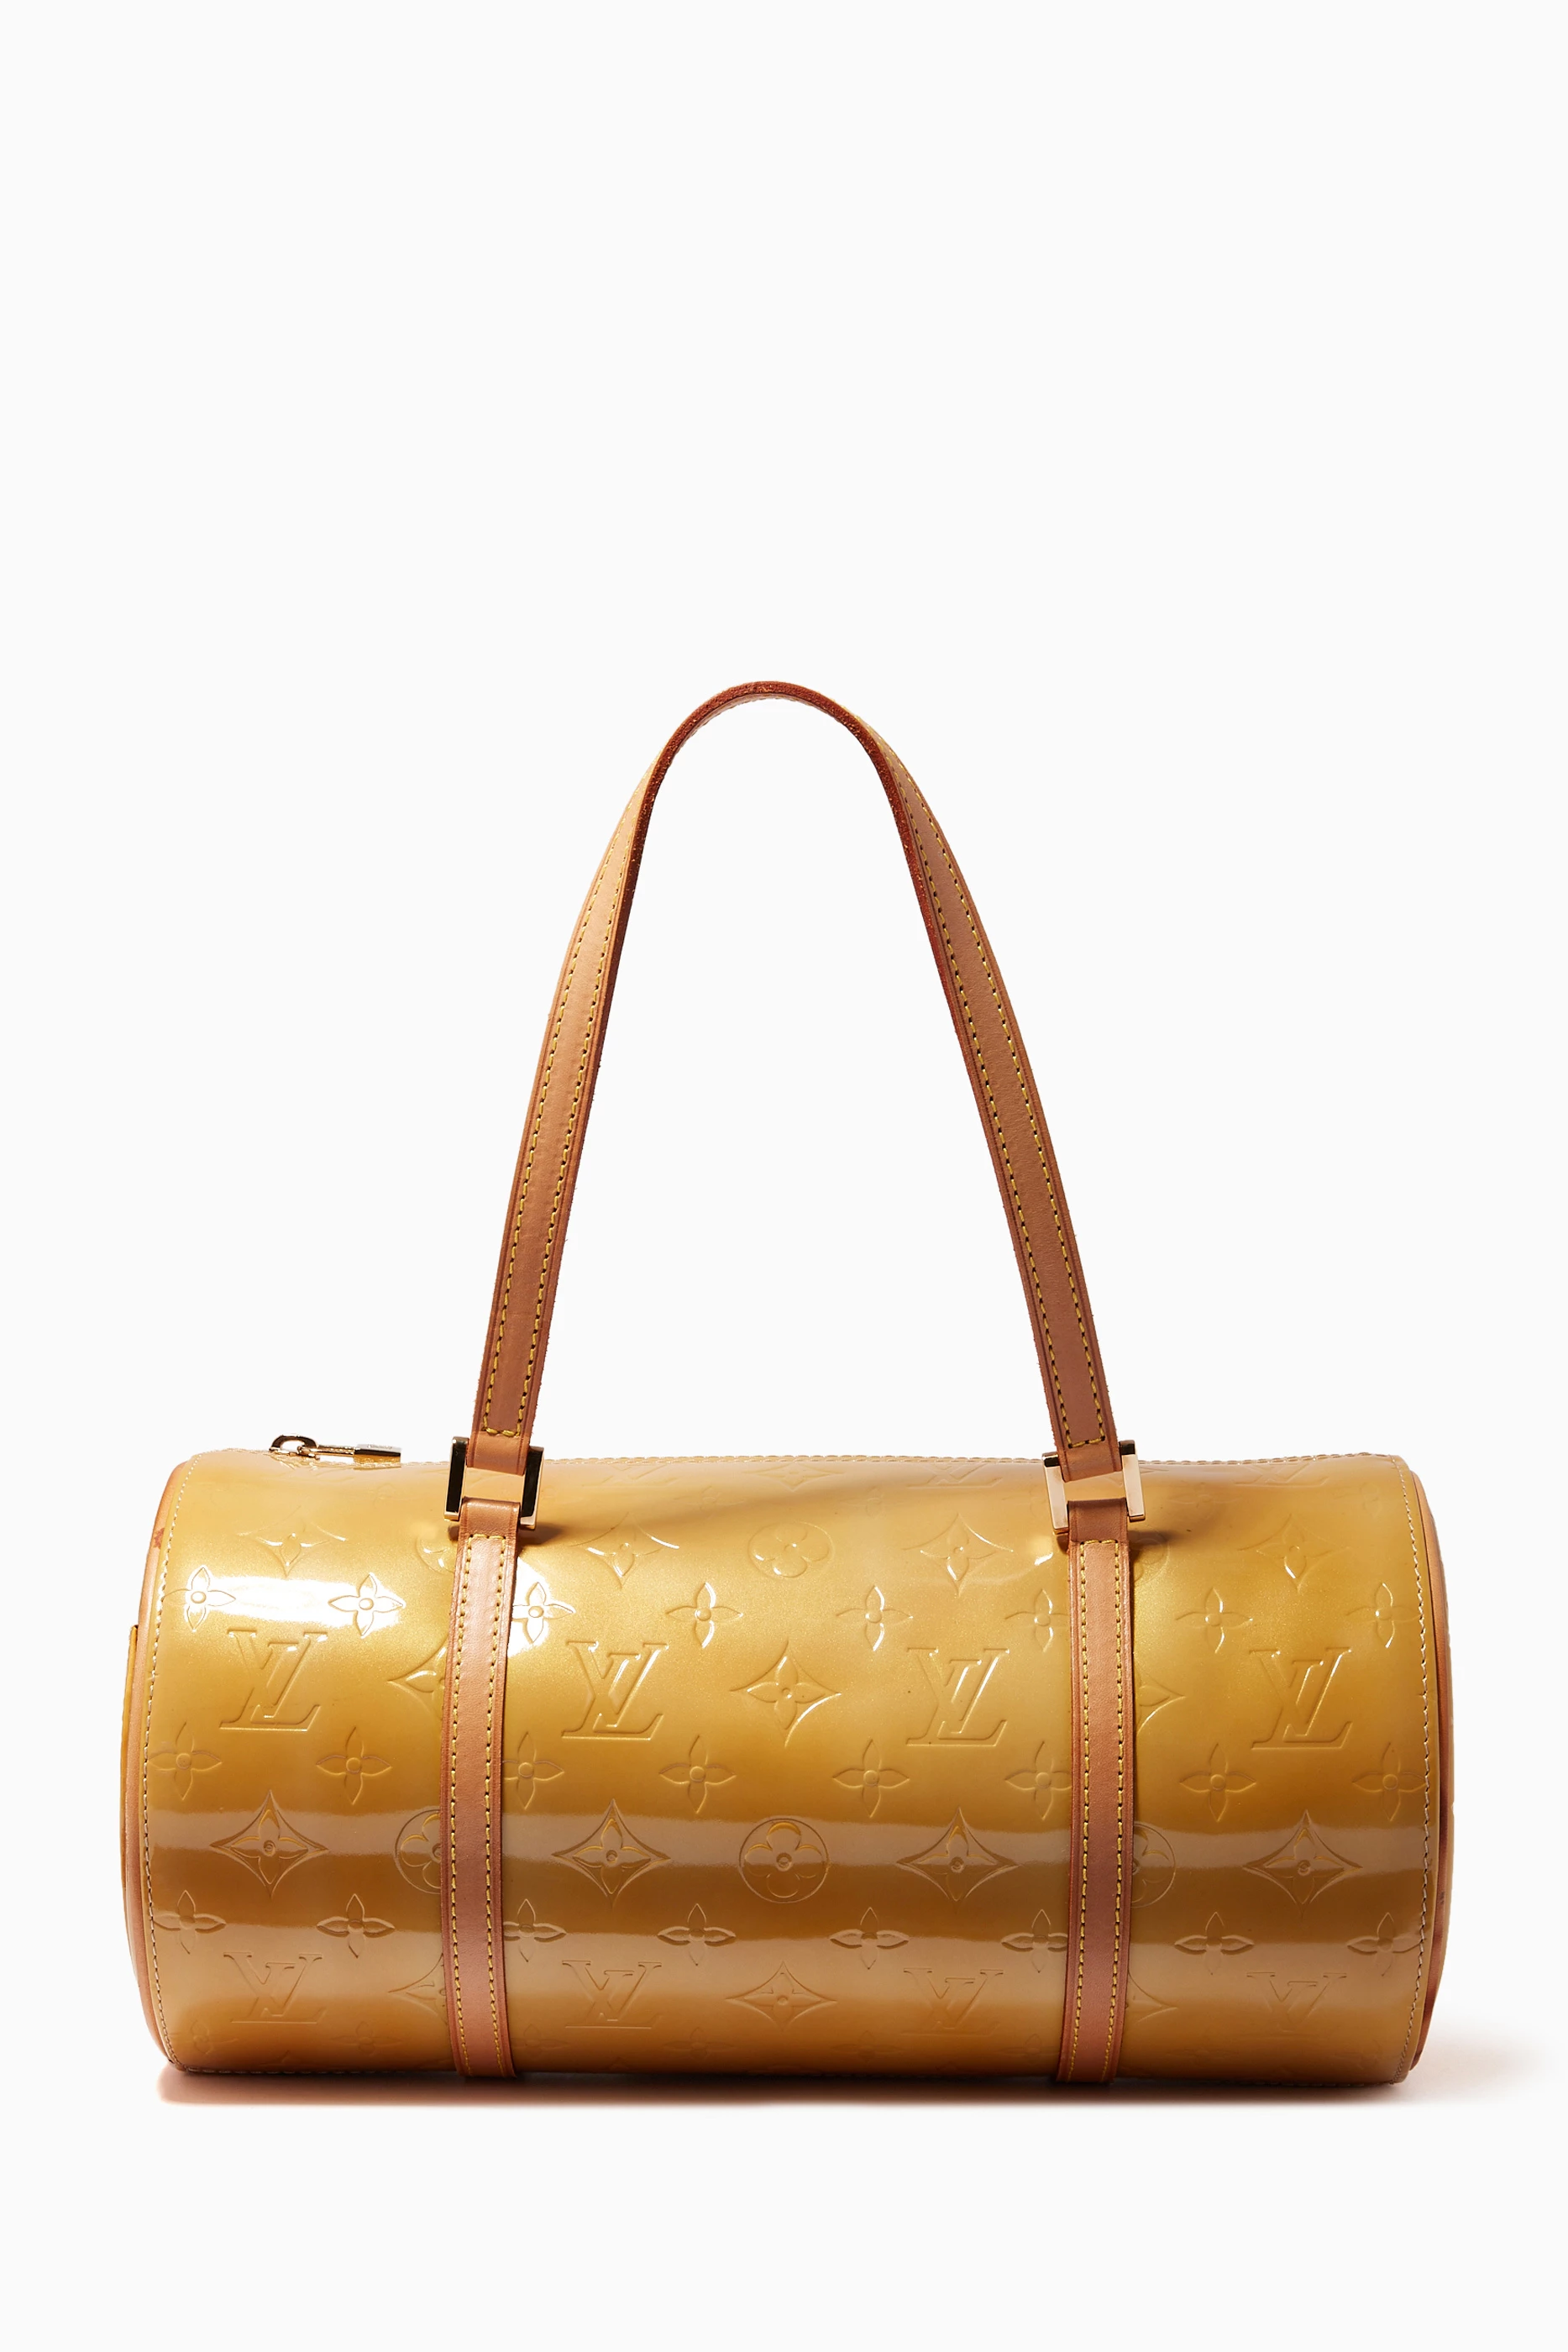 Louis Vuitton Yellow Monogram Vernis Papillon Bag – Curated by Charbel